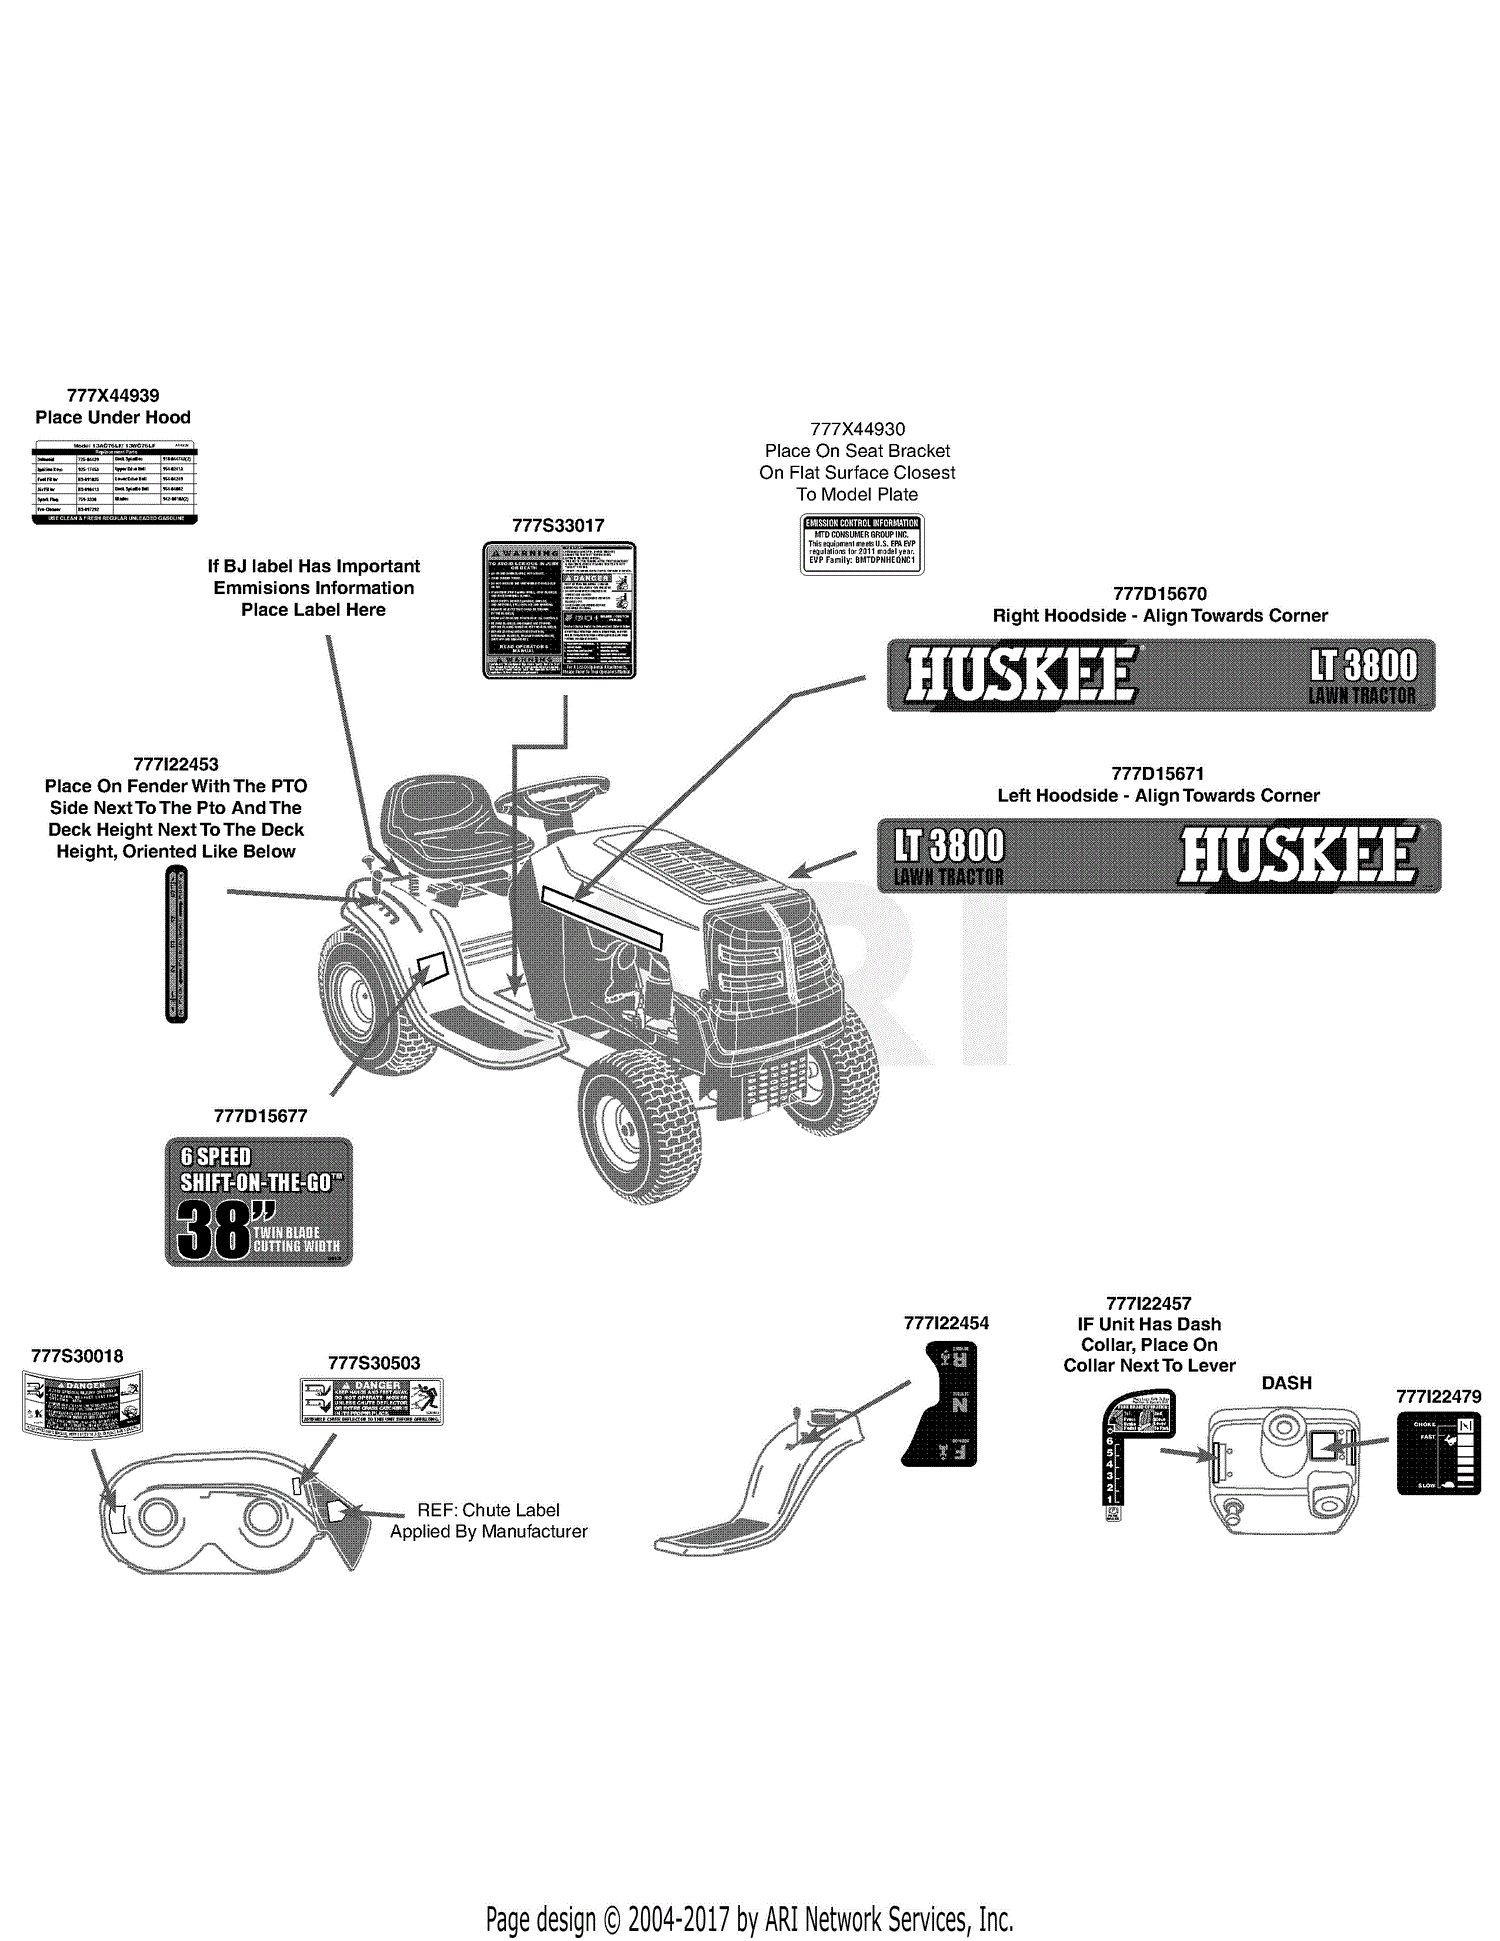 Huskee Lawn Mower Parts Diagram Mtd 13ac76lf031 Lt3800 2011 Parts Diagram For Label Map Huskee